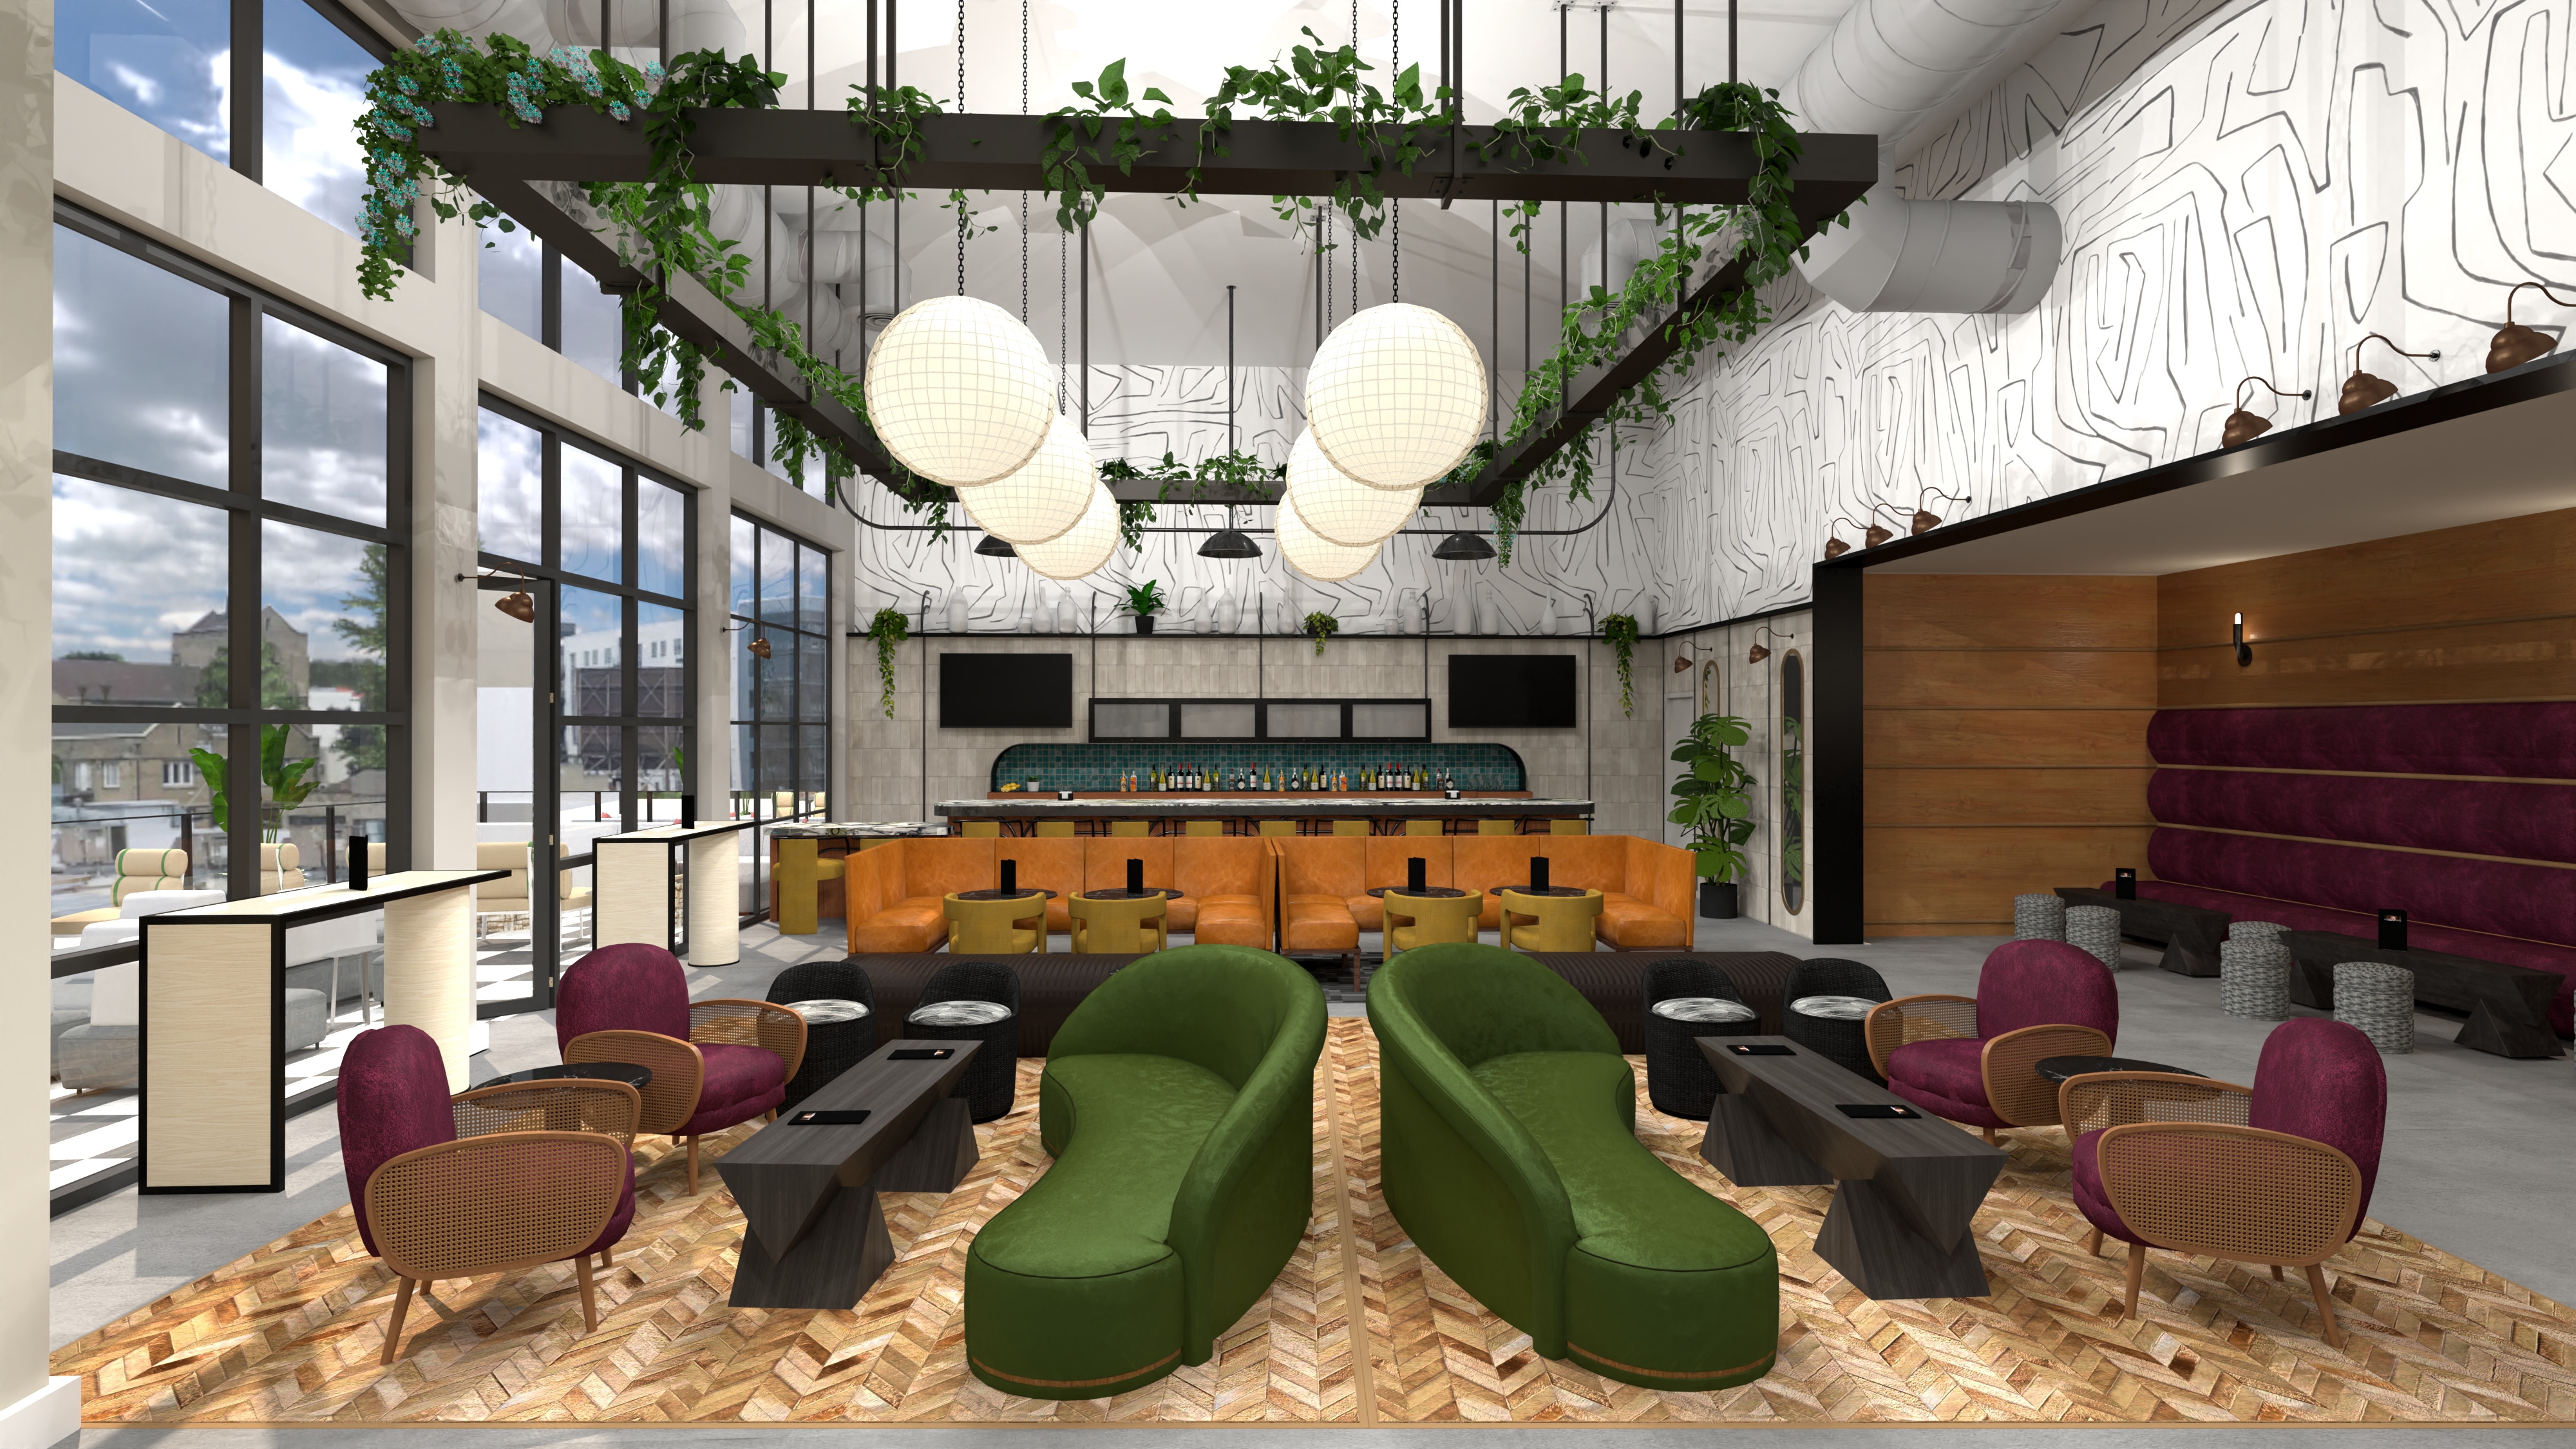 A rendering of a bar with green lounge seats, round modern lights, and hanging plants.